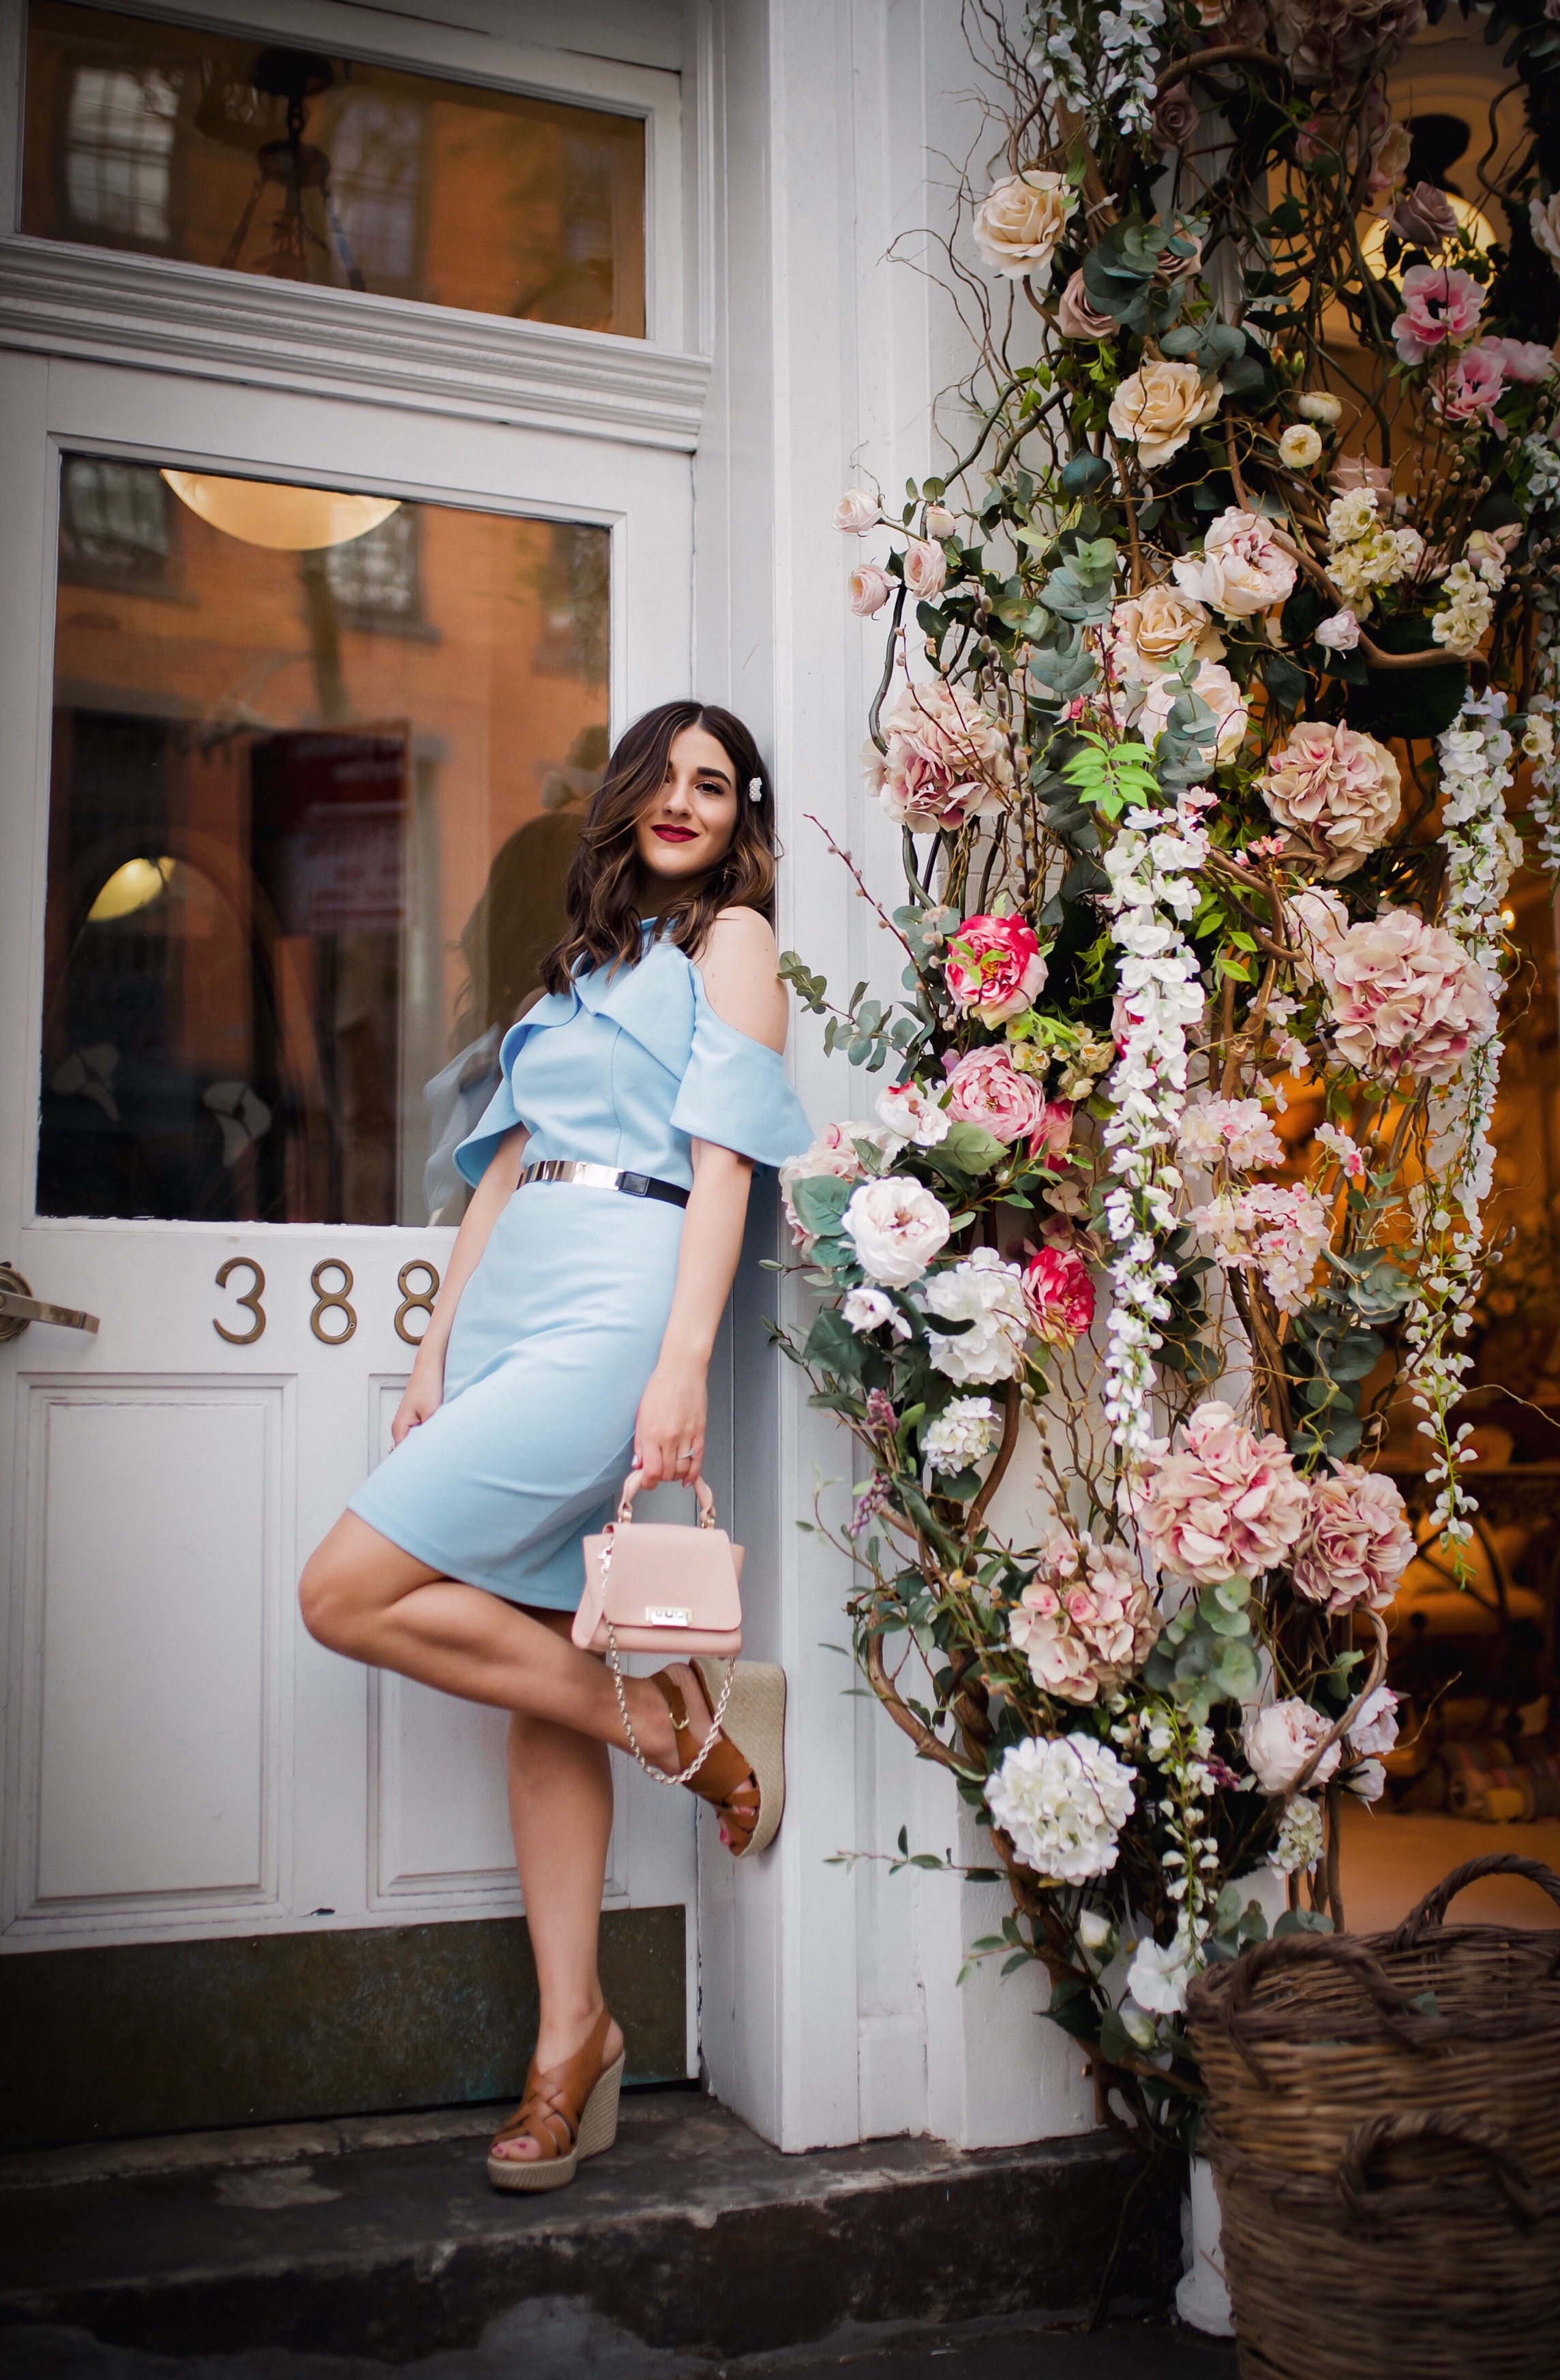 Styling XOXO For Spring Esther Santer Fashion Blog NYC Street Style Blogger Outfit OOTD Trendy Shopping Baby Blue Cold Shoulder Dress Espadrille Wedges Tan Girl Women Barette Pearl Clip Flowers Pretty Beautiful Pink Bag Shoes Belt Shopping Accessories.jpg